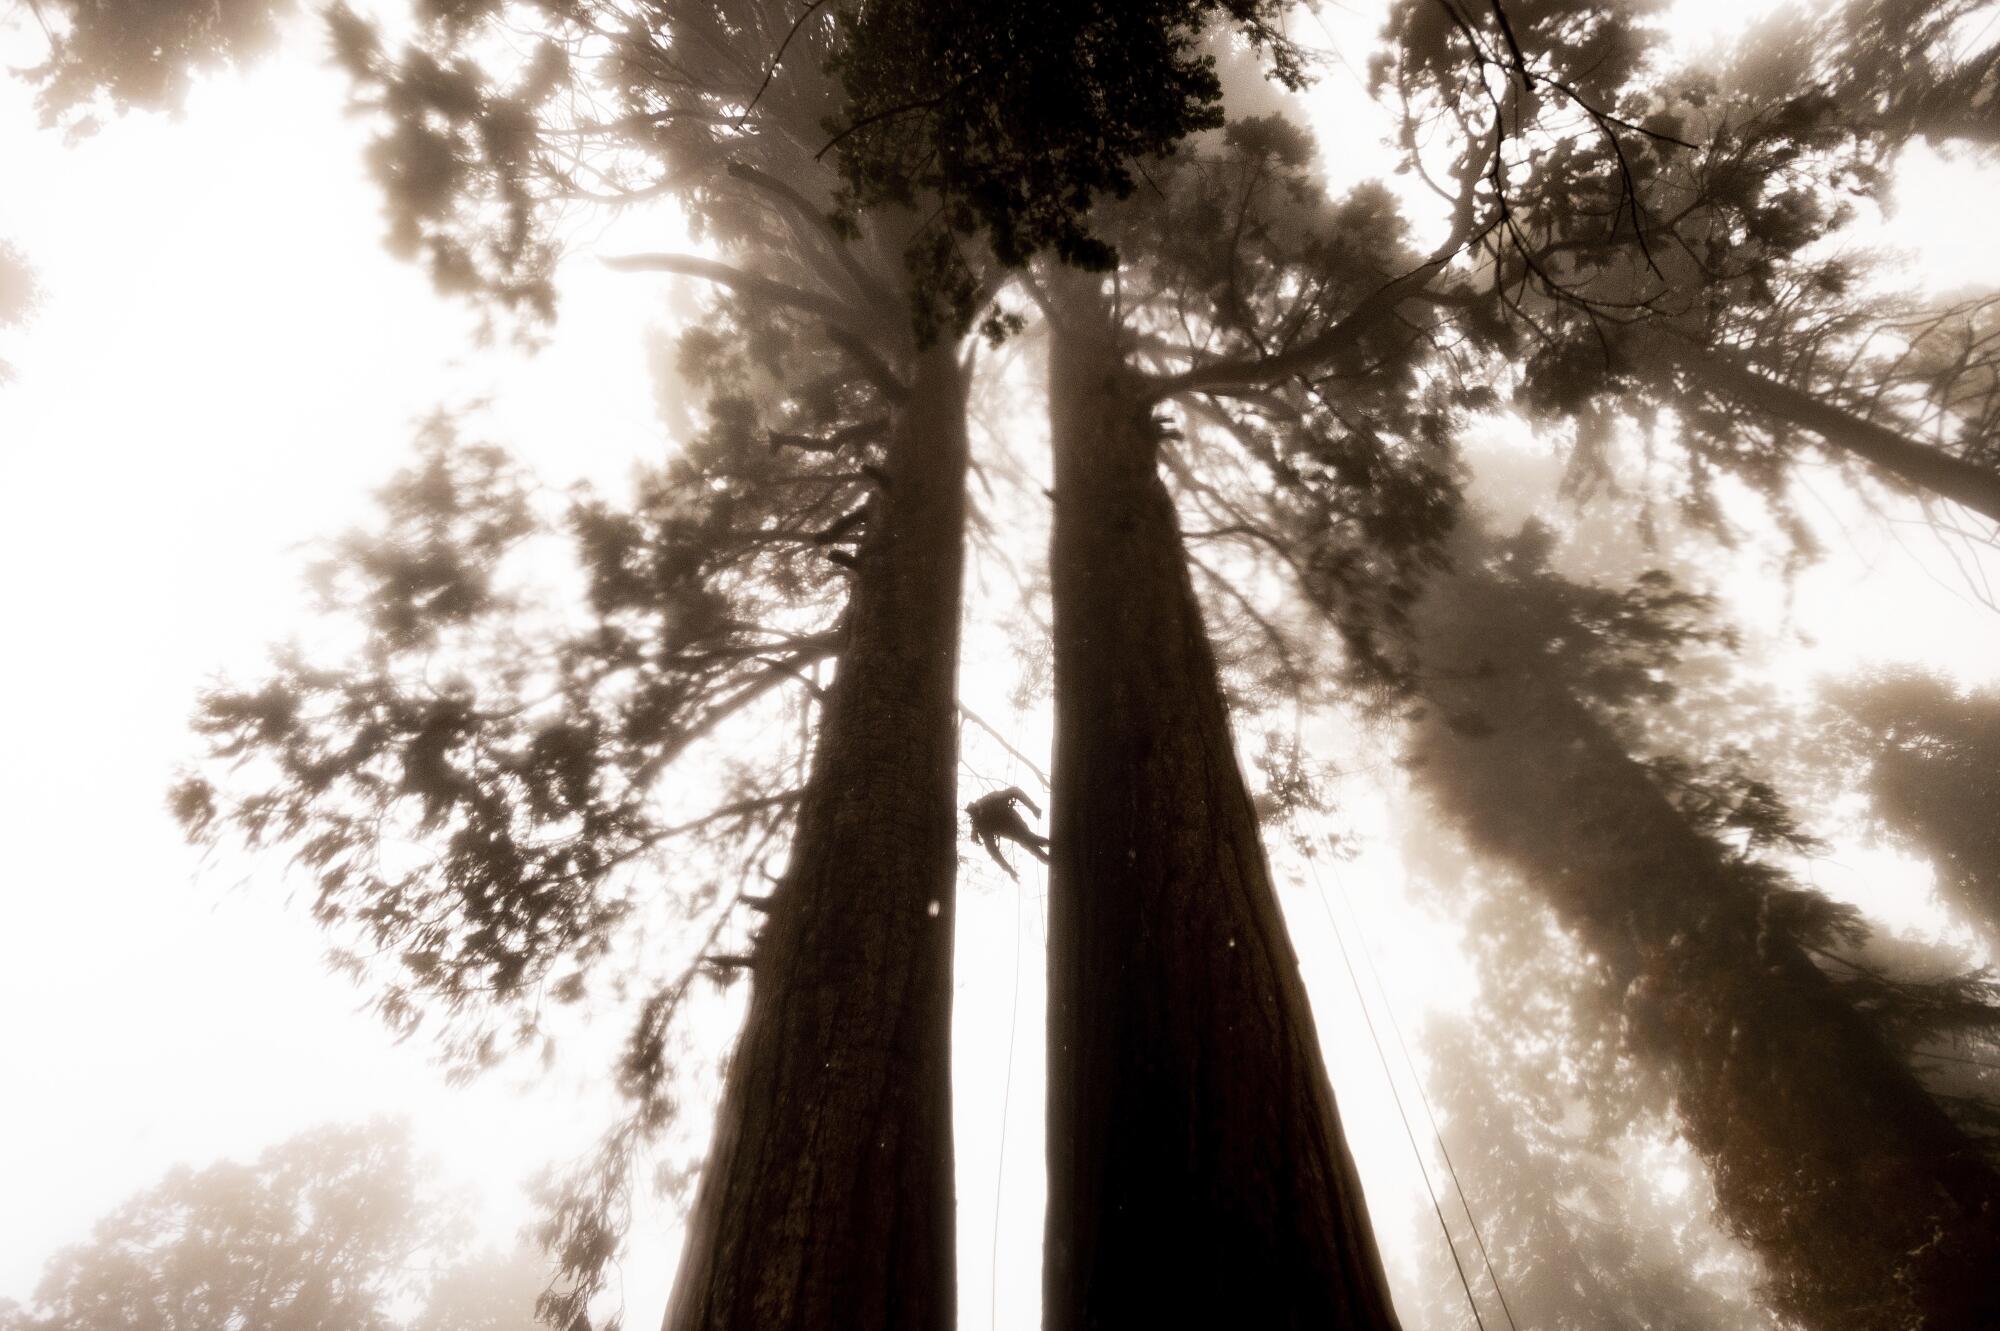 Climbing assistant Lawrence Schultz ascends the Three Sisters sequoia tree.